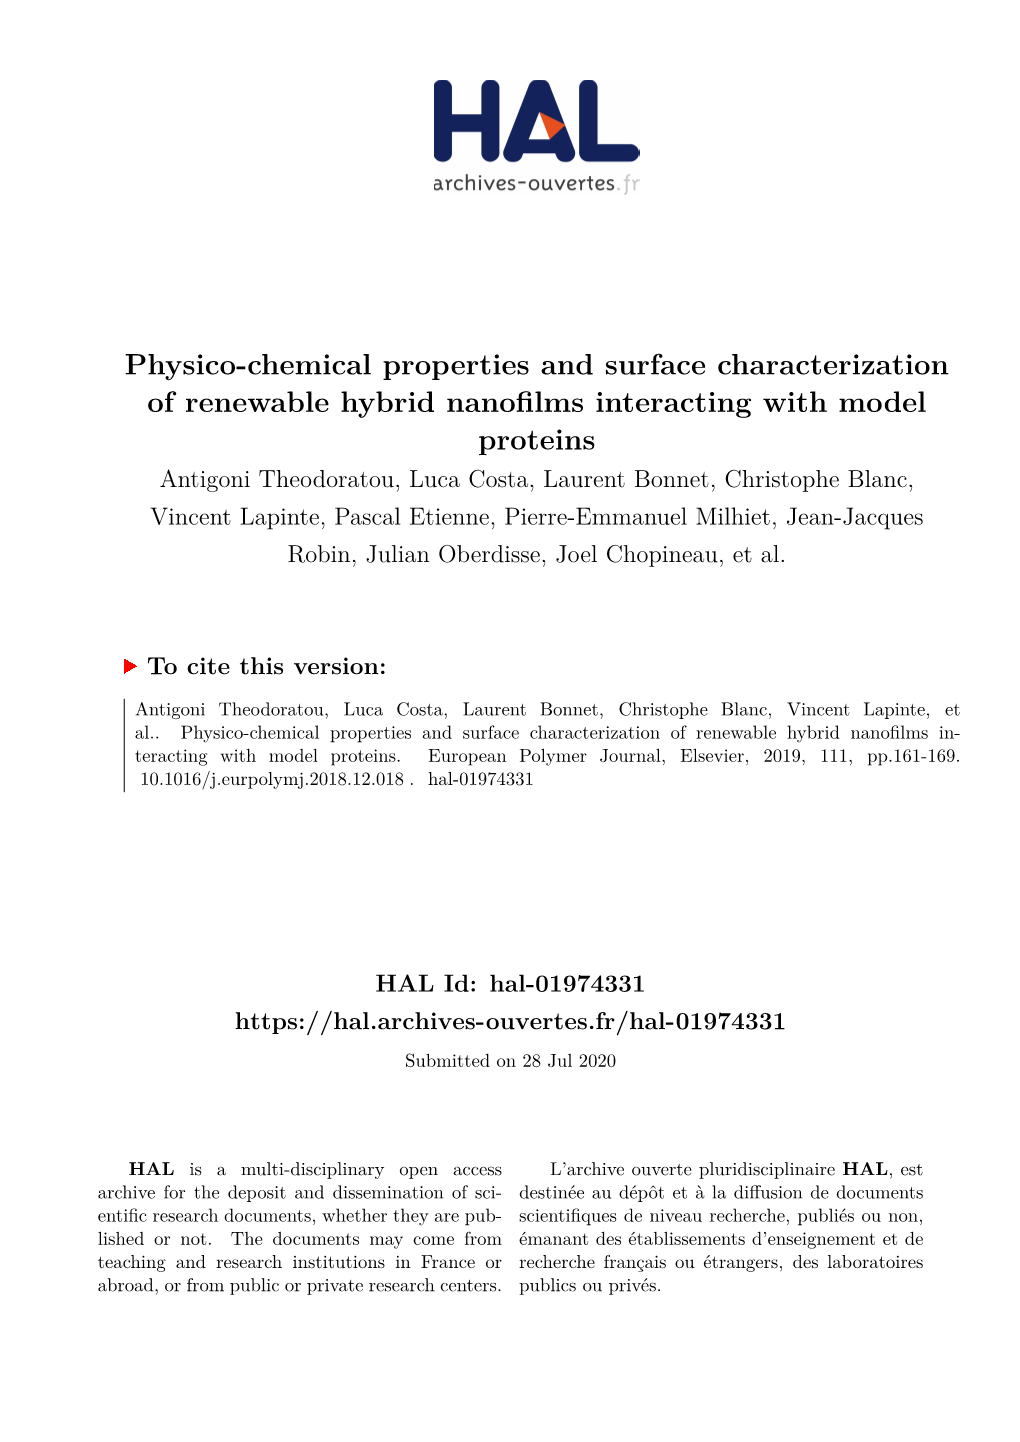 Physico-Chemical Properties and Surface Characterization of Renewable Hybrid Nanofilms Interacting with Model Proteins